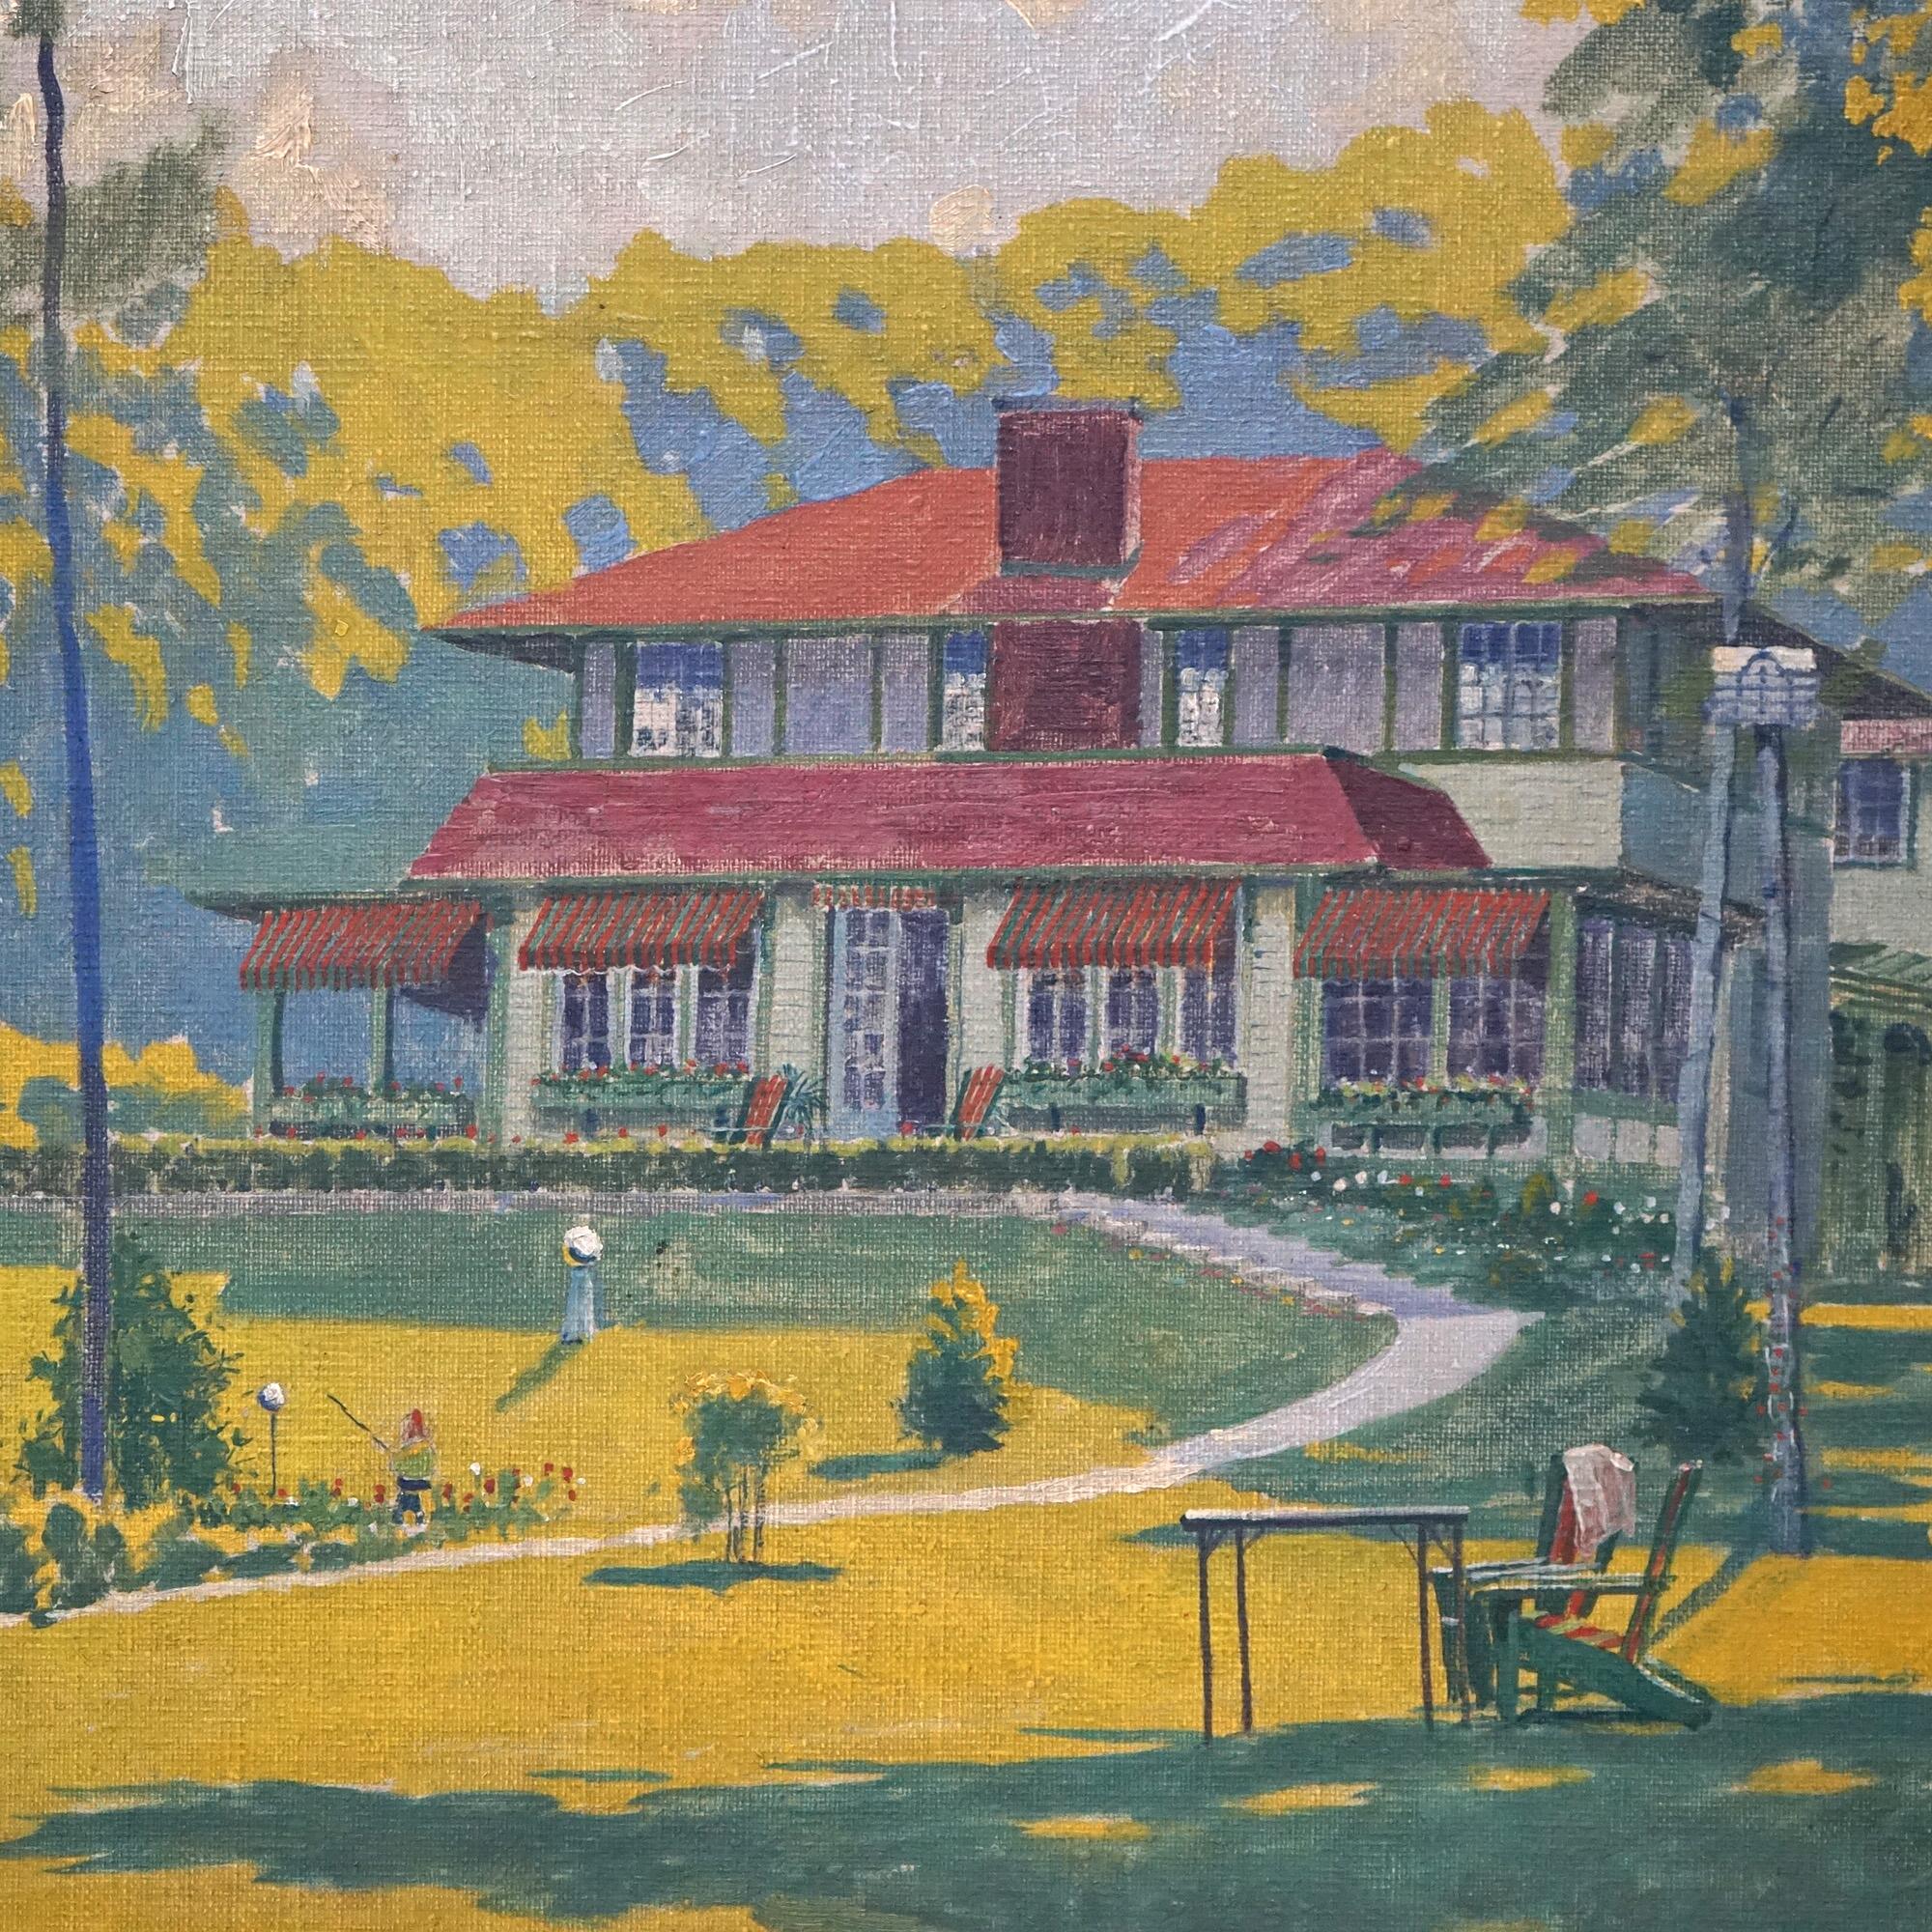 Oil On Canvas “Painting Of House” by Herman Peterson with Newcomb Macklin Giltwood Frame 20thC

Measures- 27.5''H x 37.5''W x 2.5''D; 31.5'' x 21.25'' sight